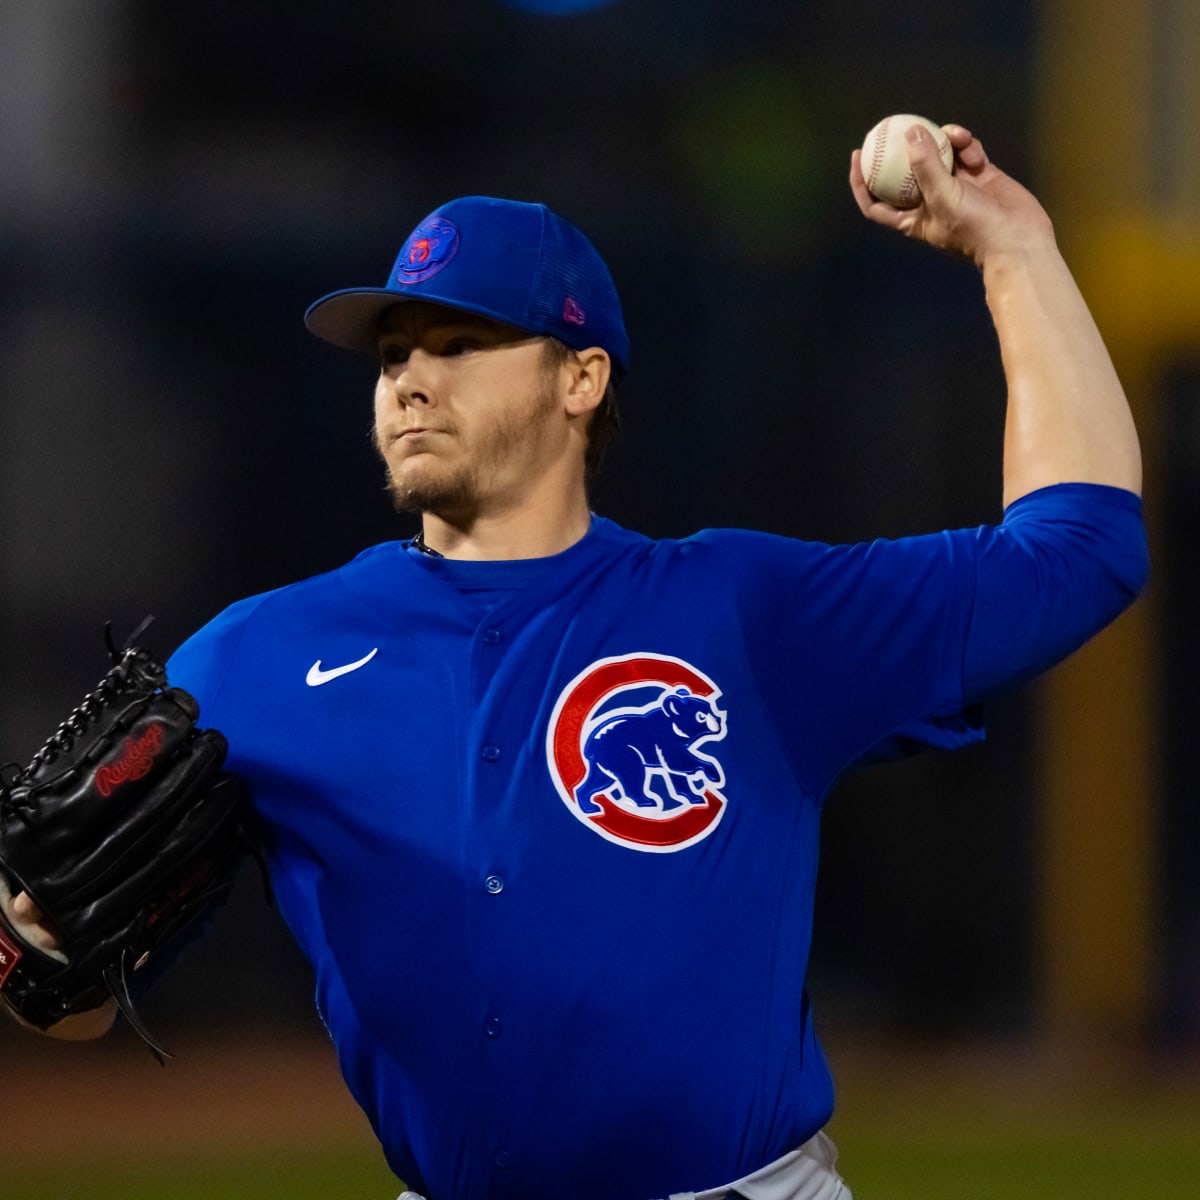 Cubs' Steele bypassed as NL's all-star starter but he says he just wants to  'get out there and do my job